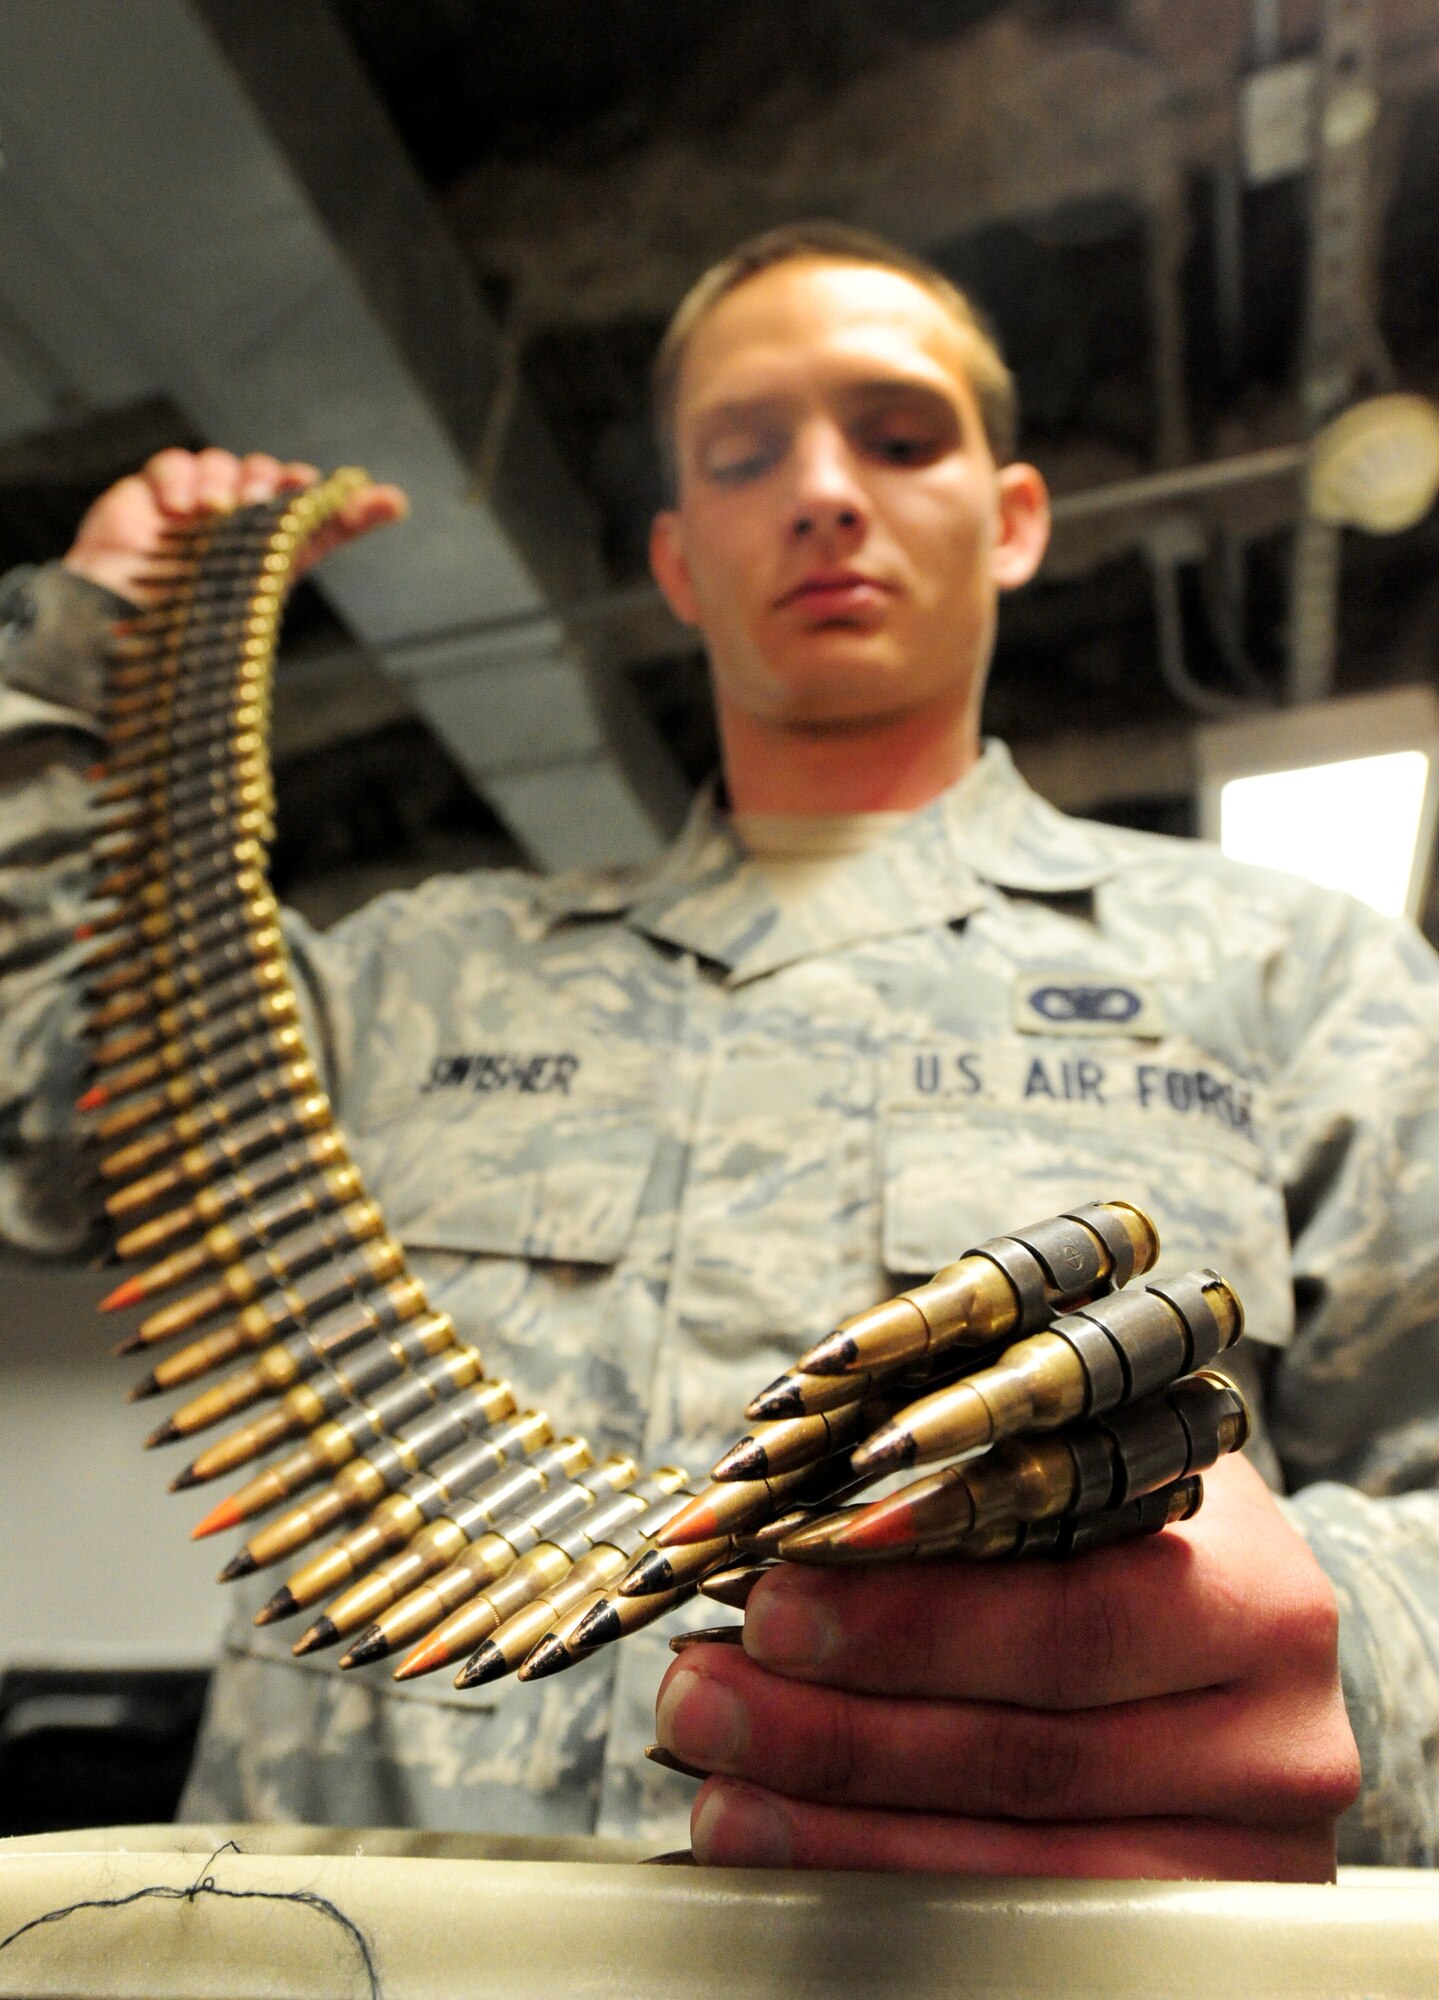 Airman Brandon Swisher, 509th Security Forces Squadron response force member, counts M240 machine gun rounds in the armory during his 12-hour shift at Whiteman Air Force Base, Mo., March 25, 2013.  The armory is a safe and secure location on base to store weapons. (U.S. Air Force photo by Staff Sgt. Nick Wilson/Released) 